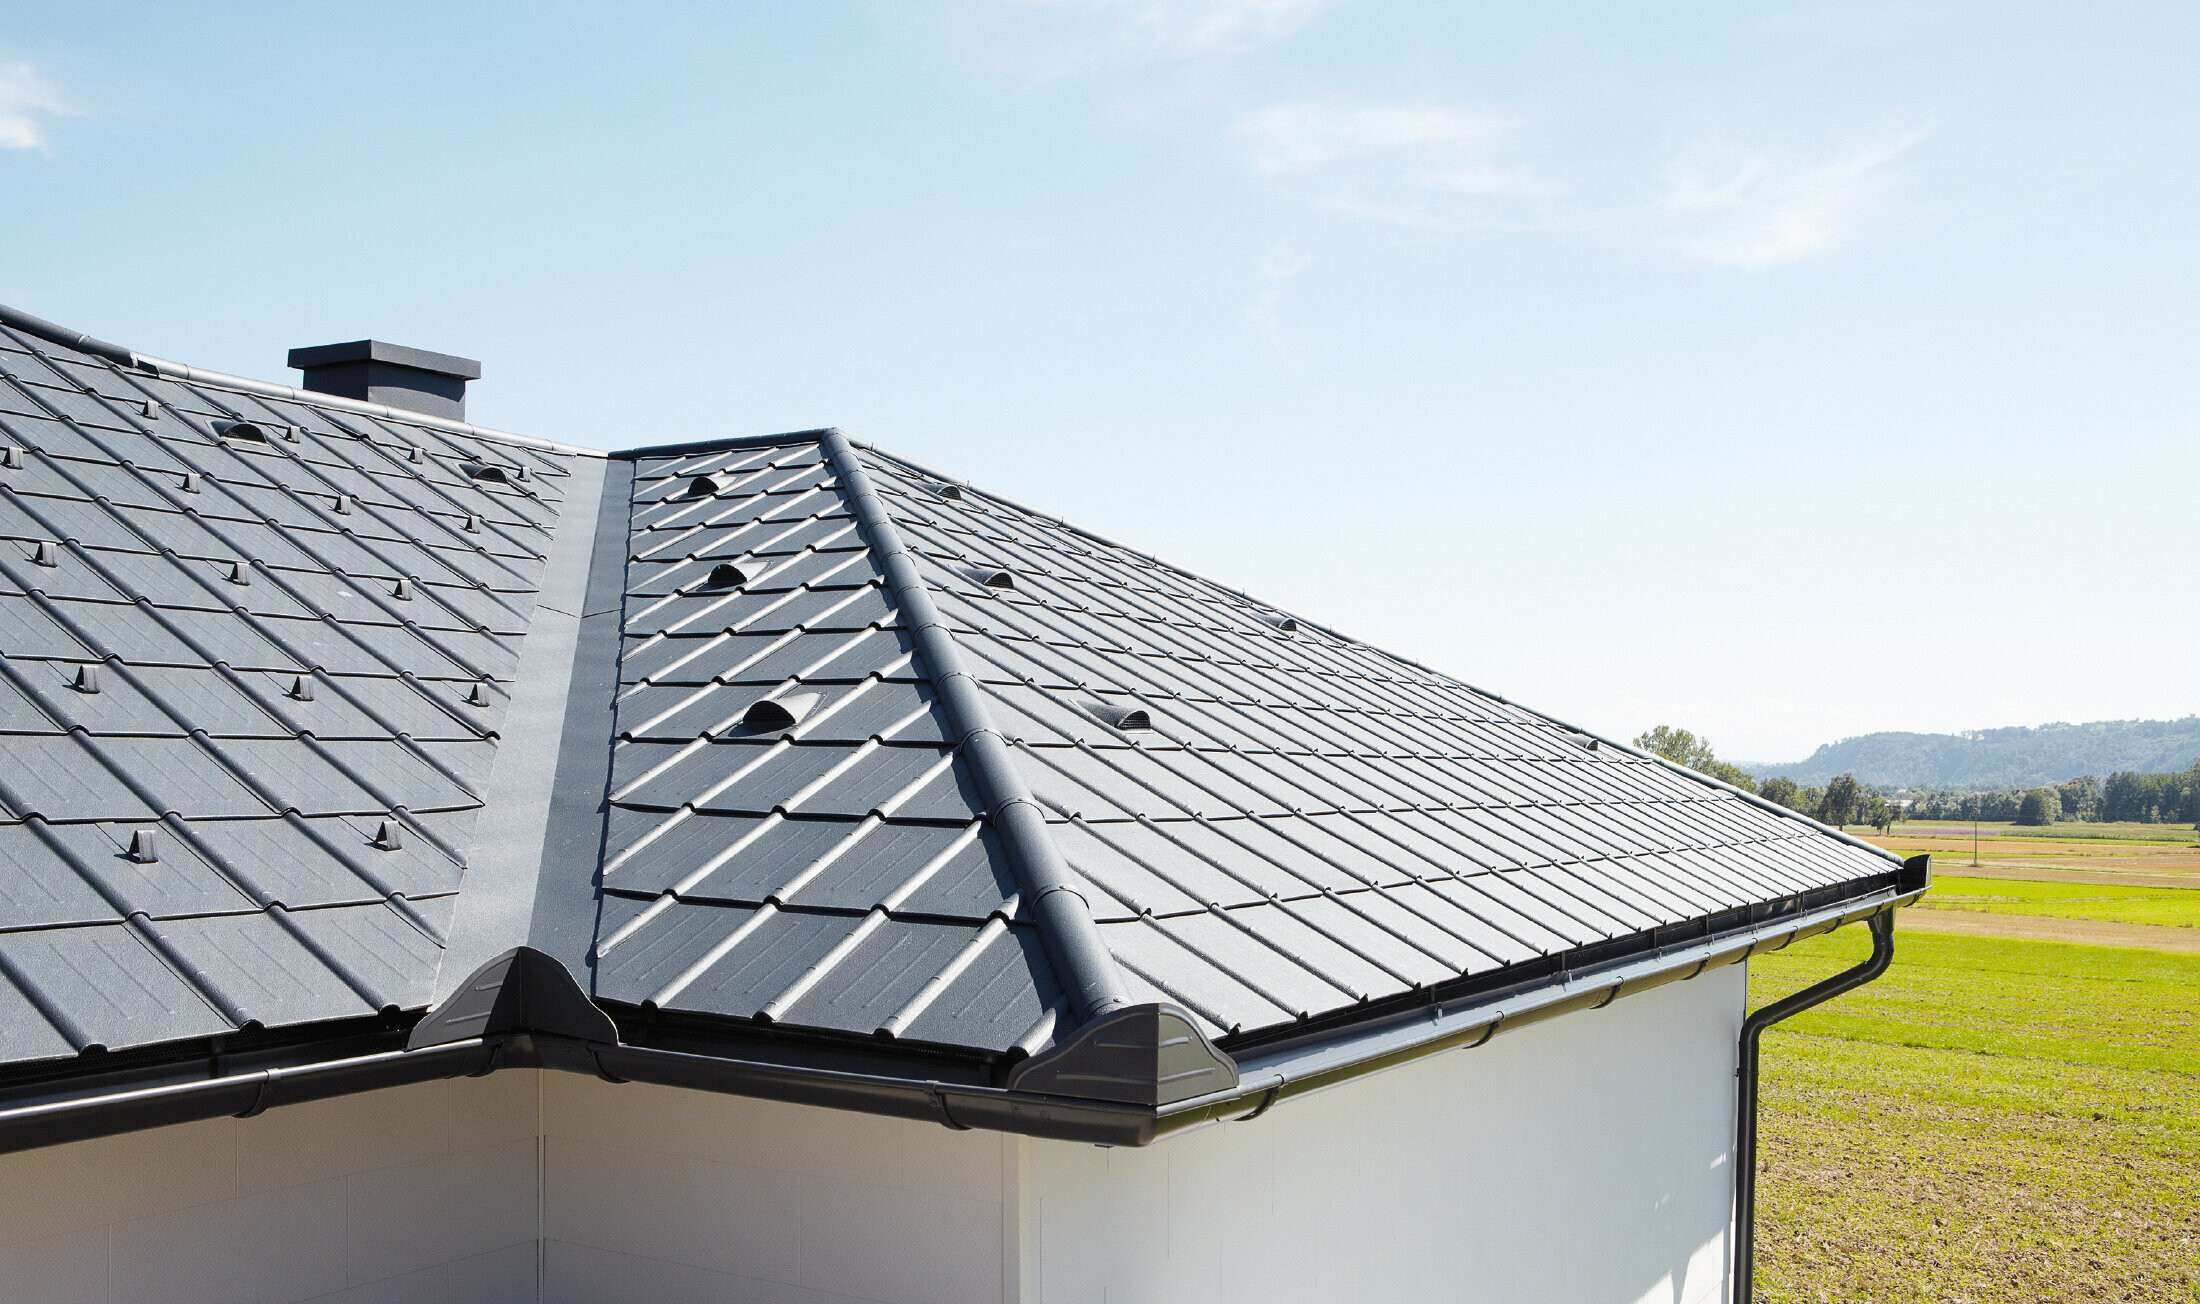 Detached bungalow, the roof is covered with PREFA roof tiles and the gutter in anthracite, you can also see a valley